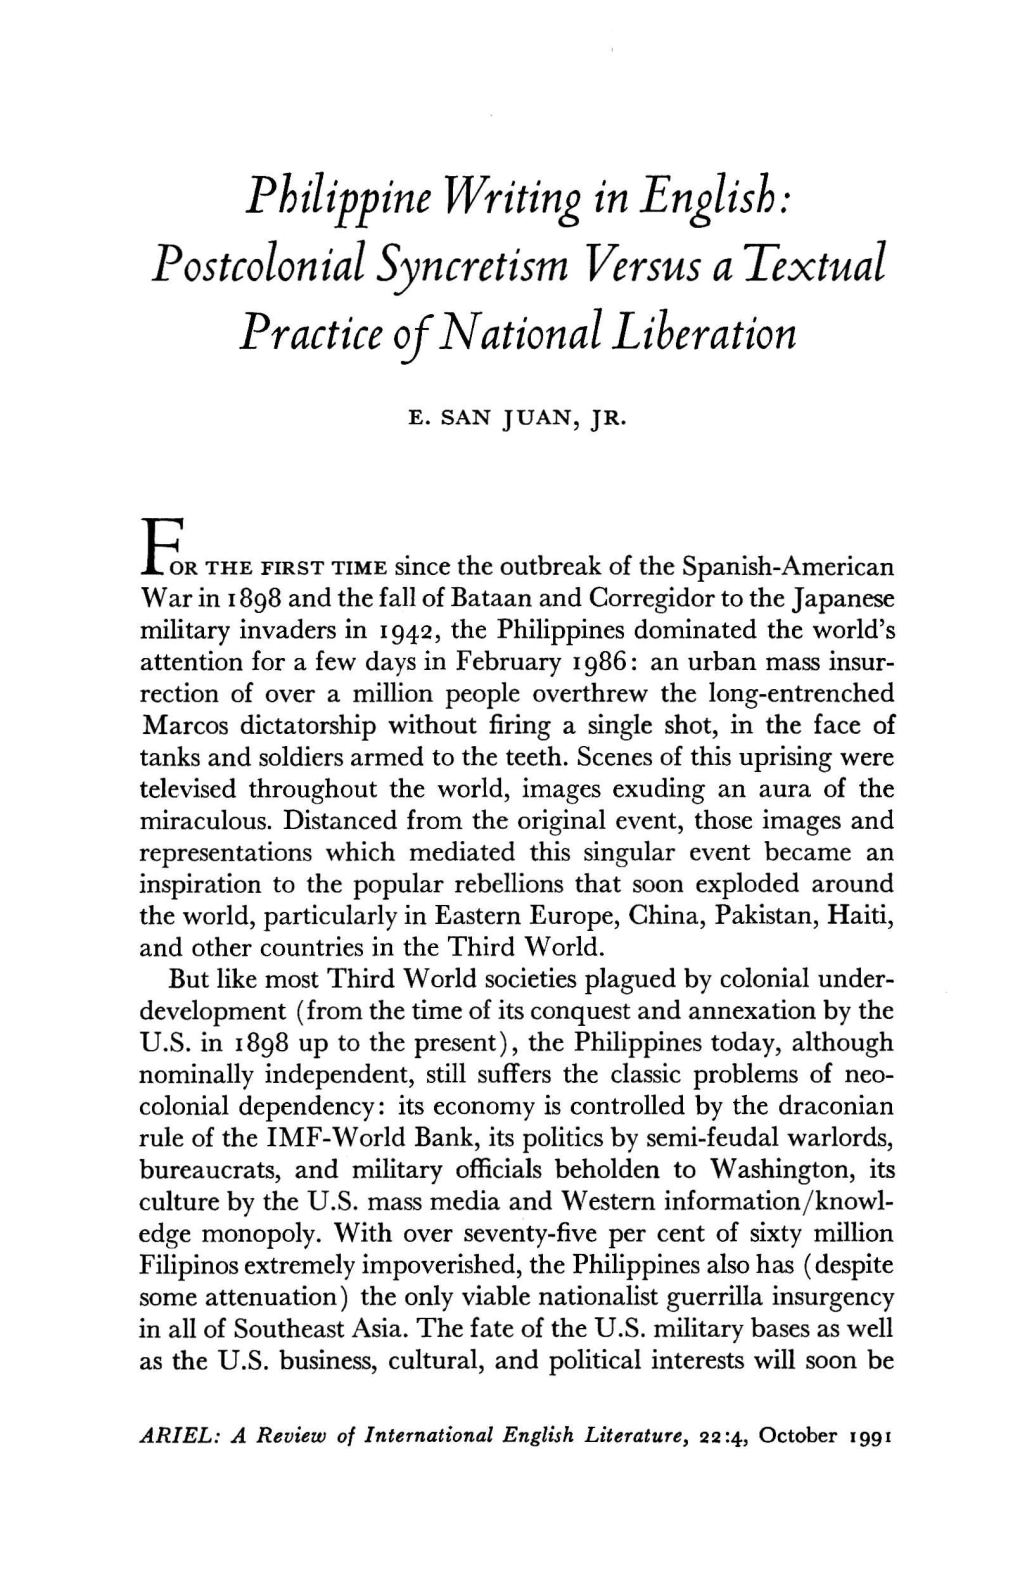 Philippine Writing in English: Postcolonial Syncretism Versus a Textual Practice of National Liberation